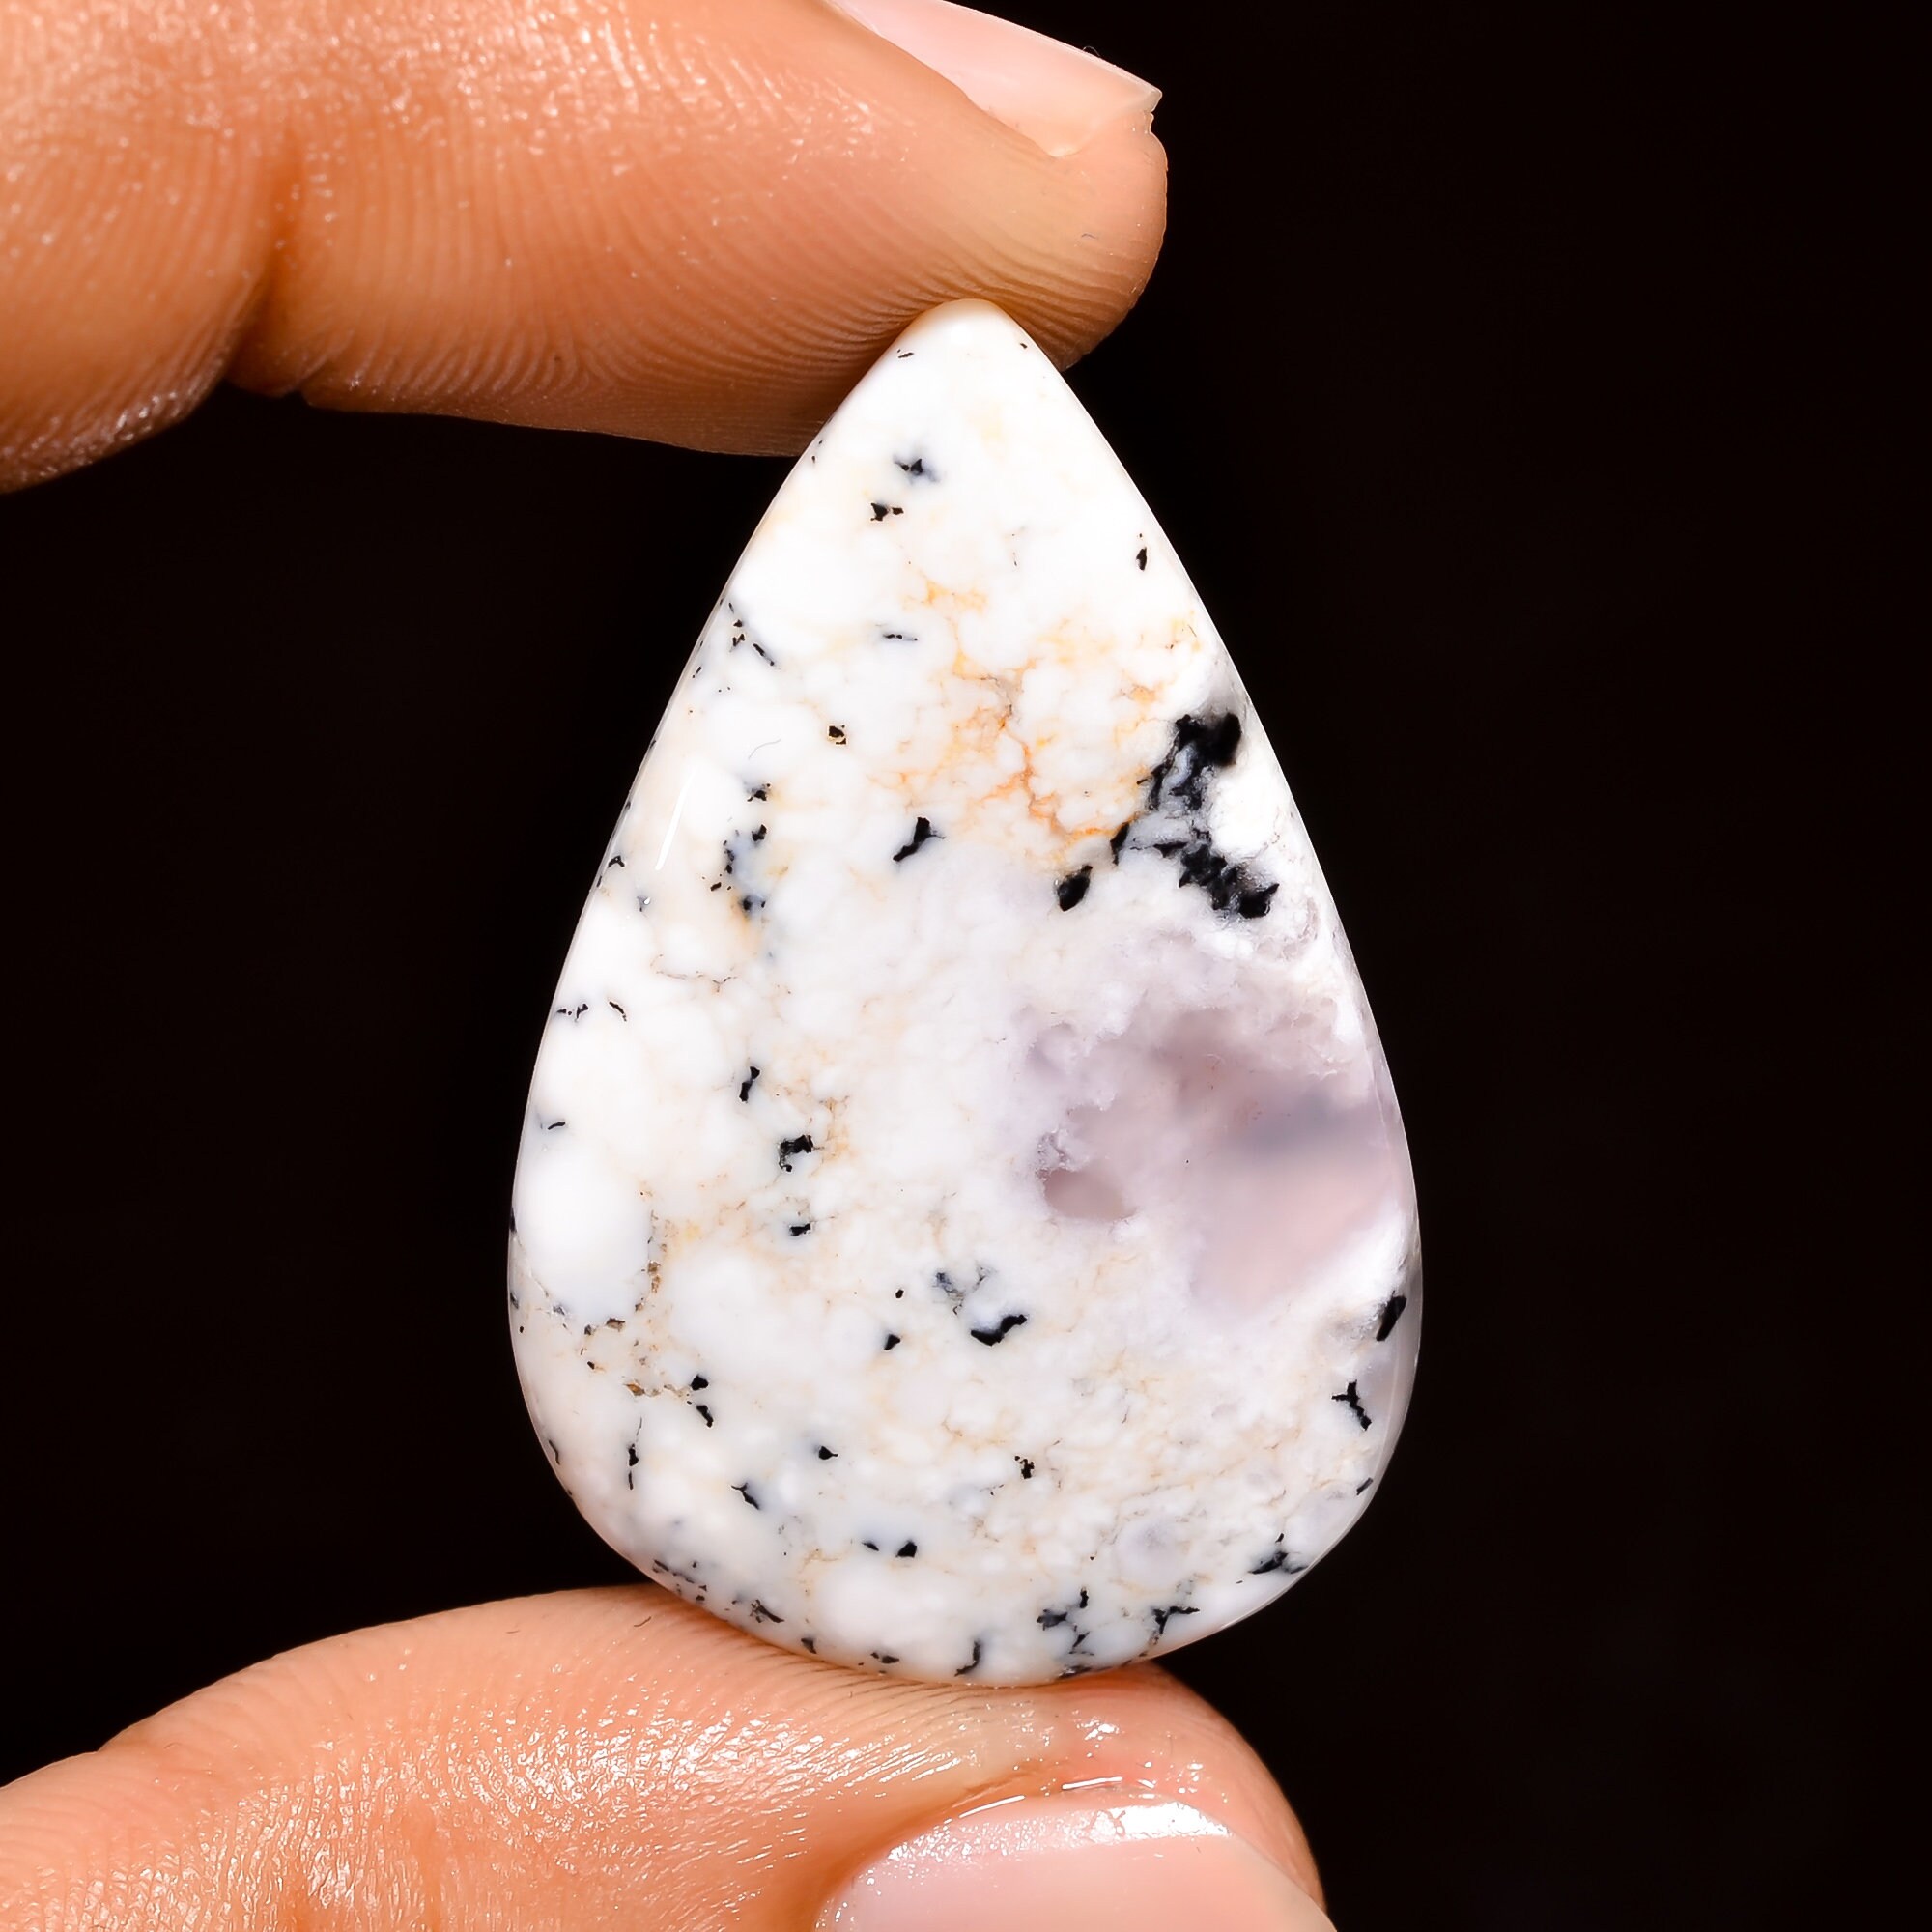 39X22X7 mm HM-1284 Dazzling Top Grade Quality 100% Natural Dendrite Opal Pear Shape Cabochon Loose Gemstone For Making Jewelry 38.5 Ct